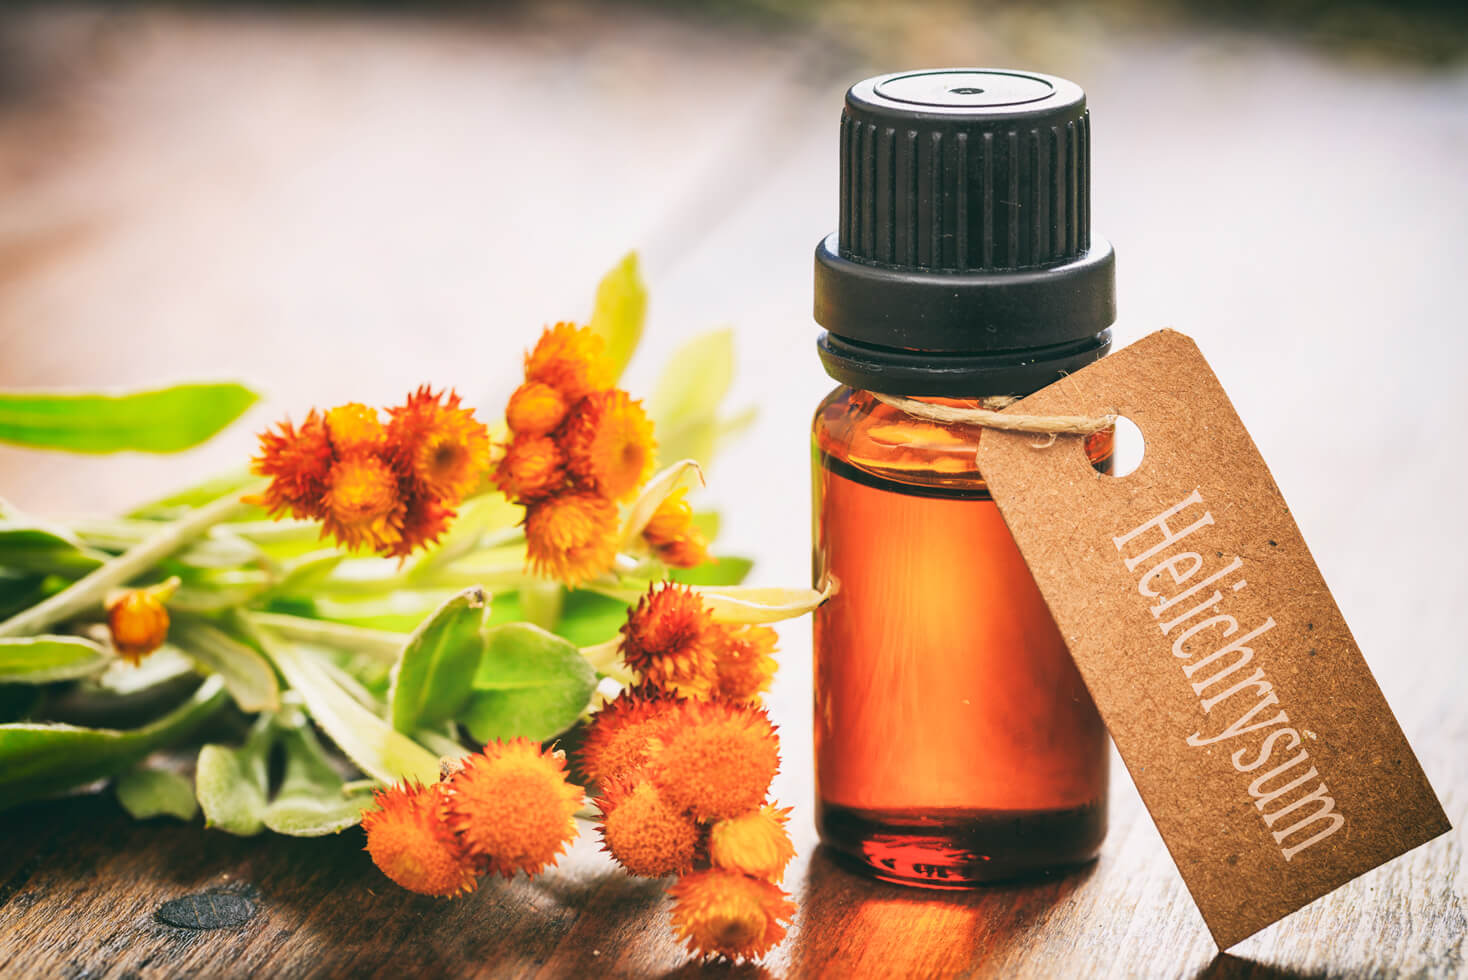 Helichrysum Oil – The Healing Powers of the “Fleur Immortelle”